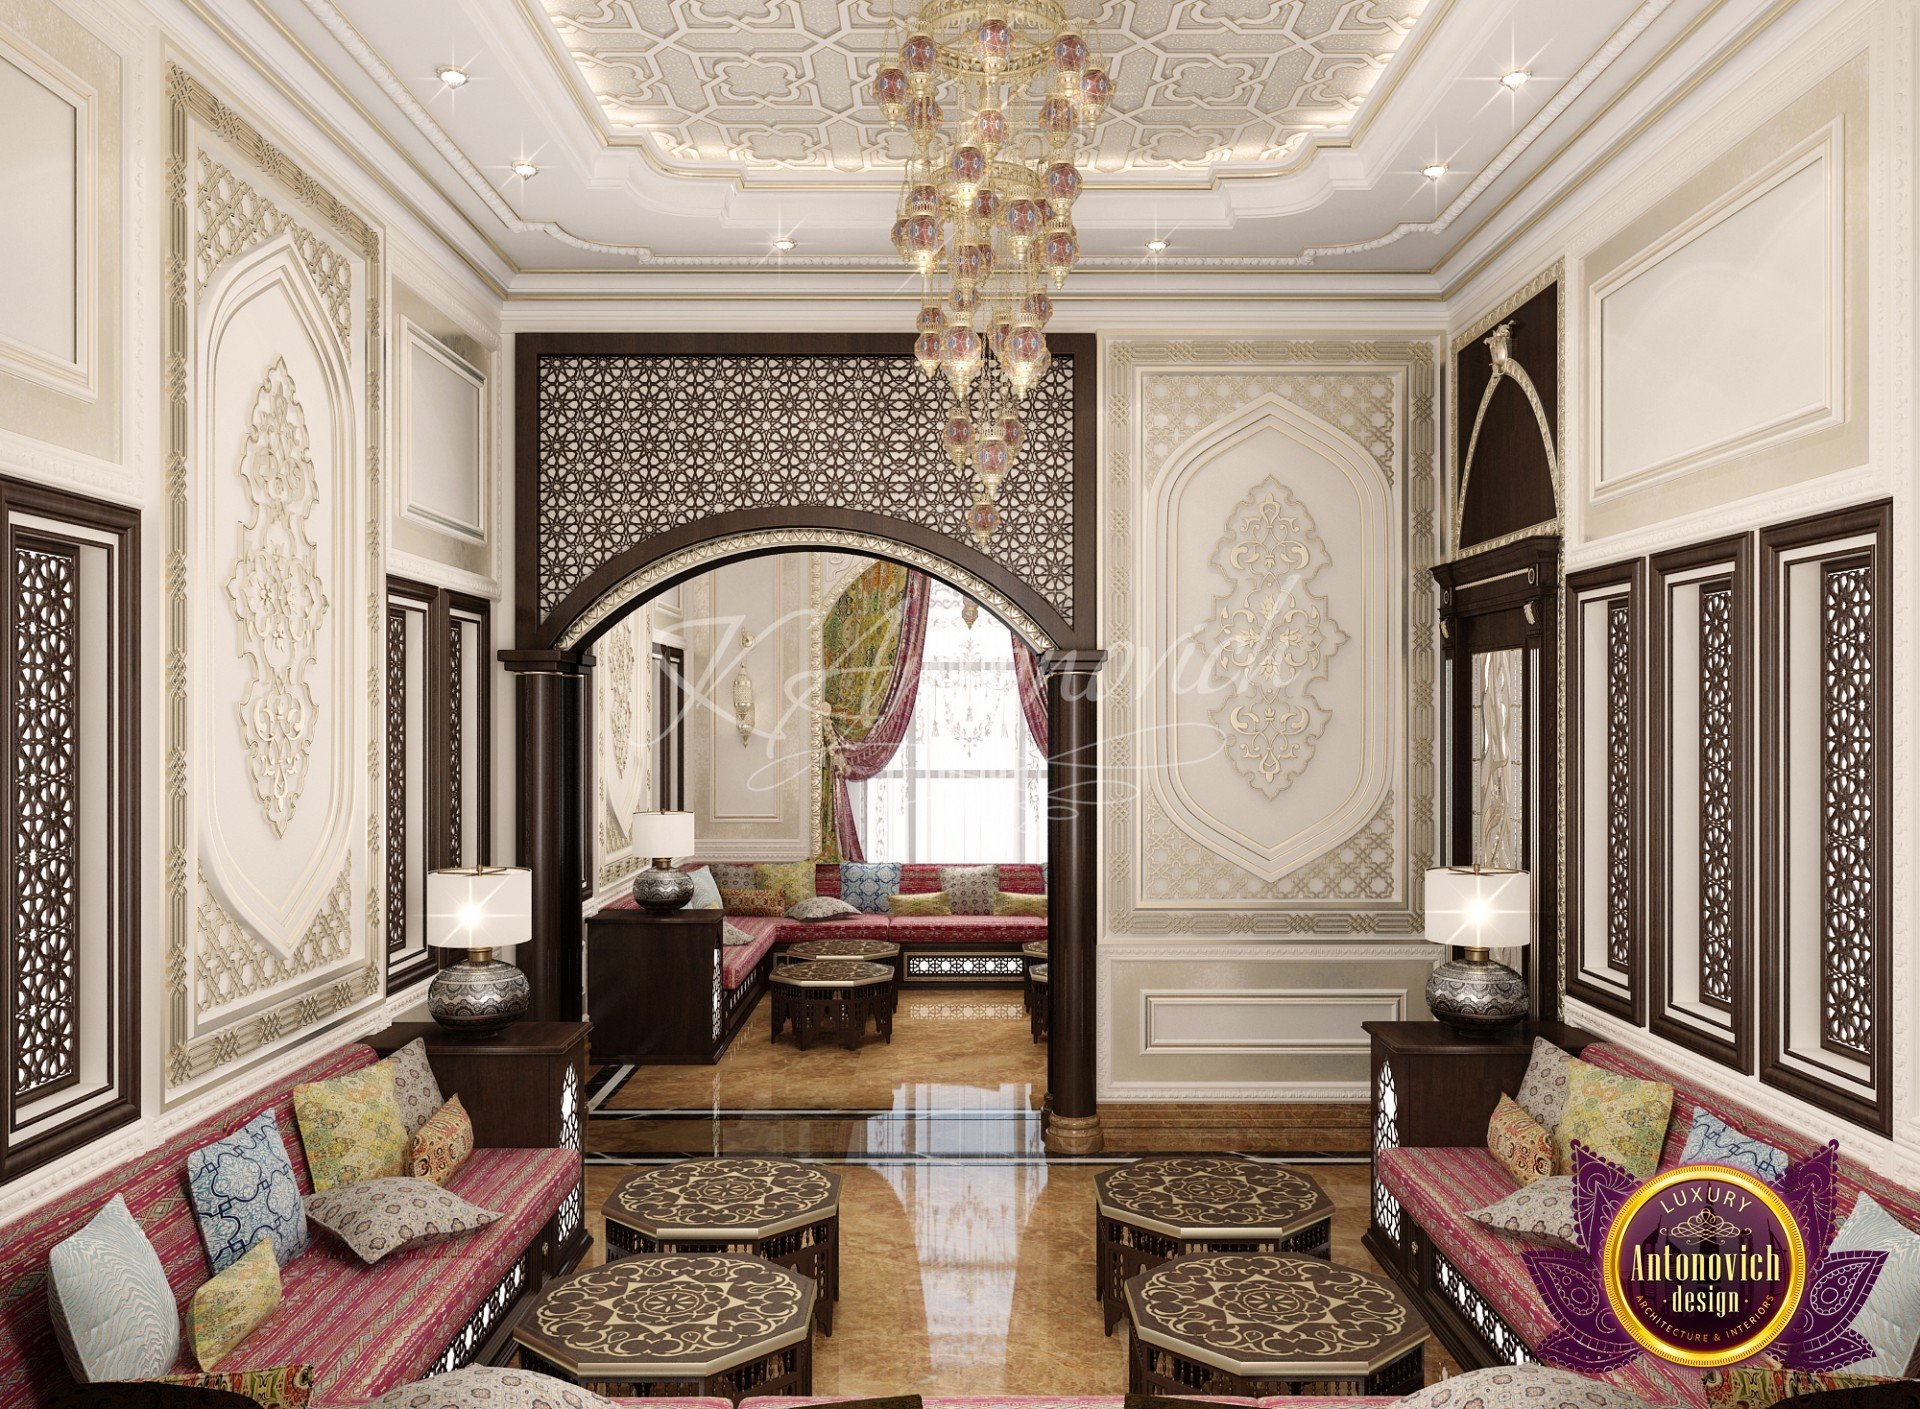 Exquisite Arabic Majlis Room with plush seating and intricate details